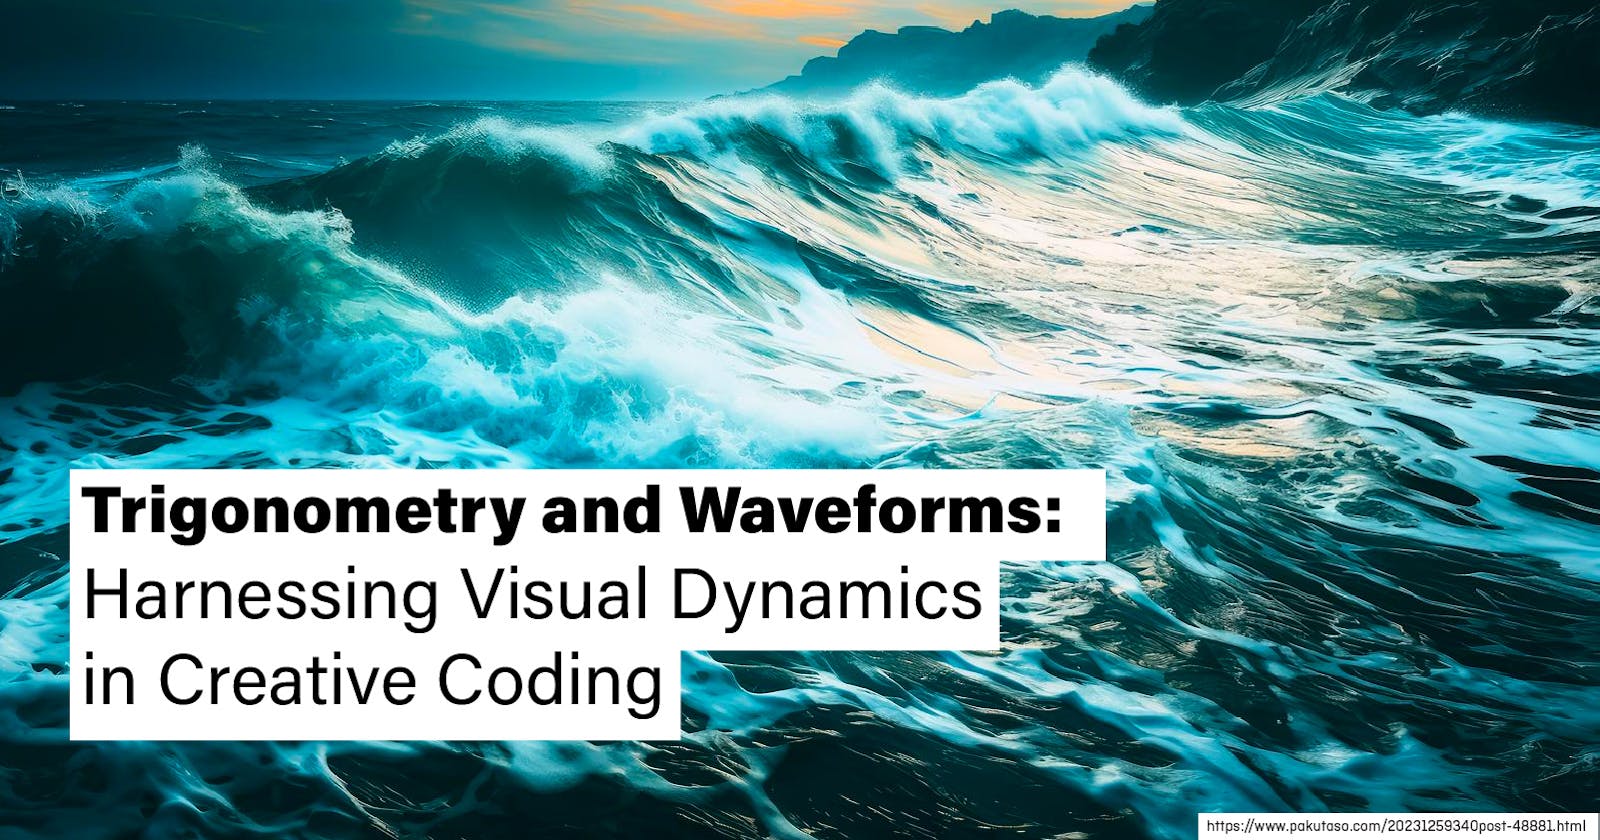 Trigonometry and Waveforms: Harnessing Visual Dynamics in Creative Coding